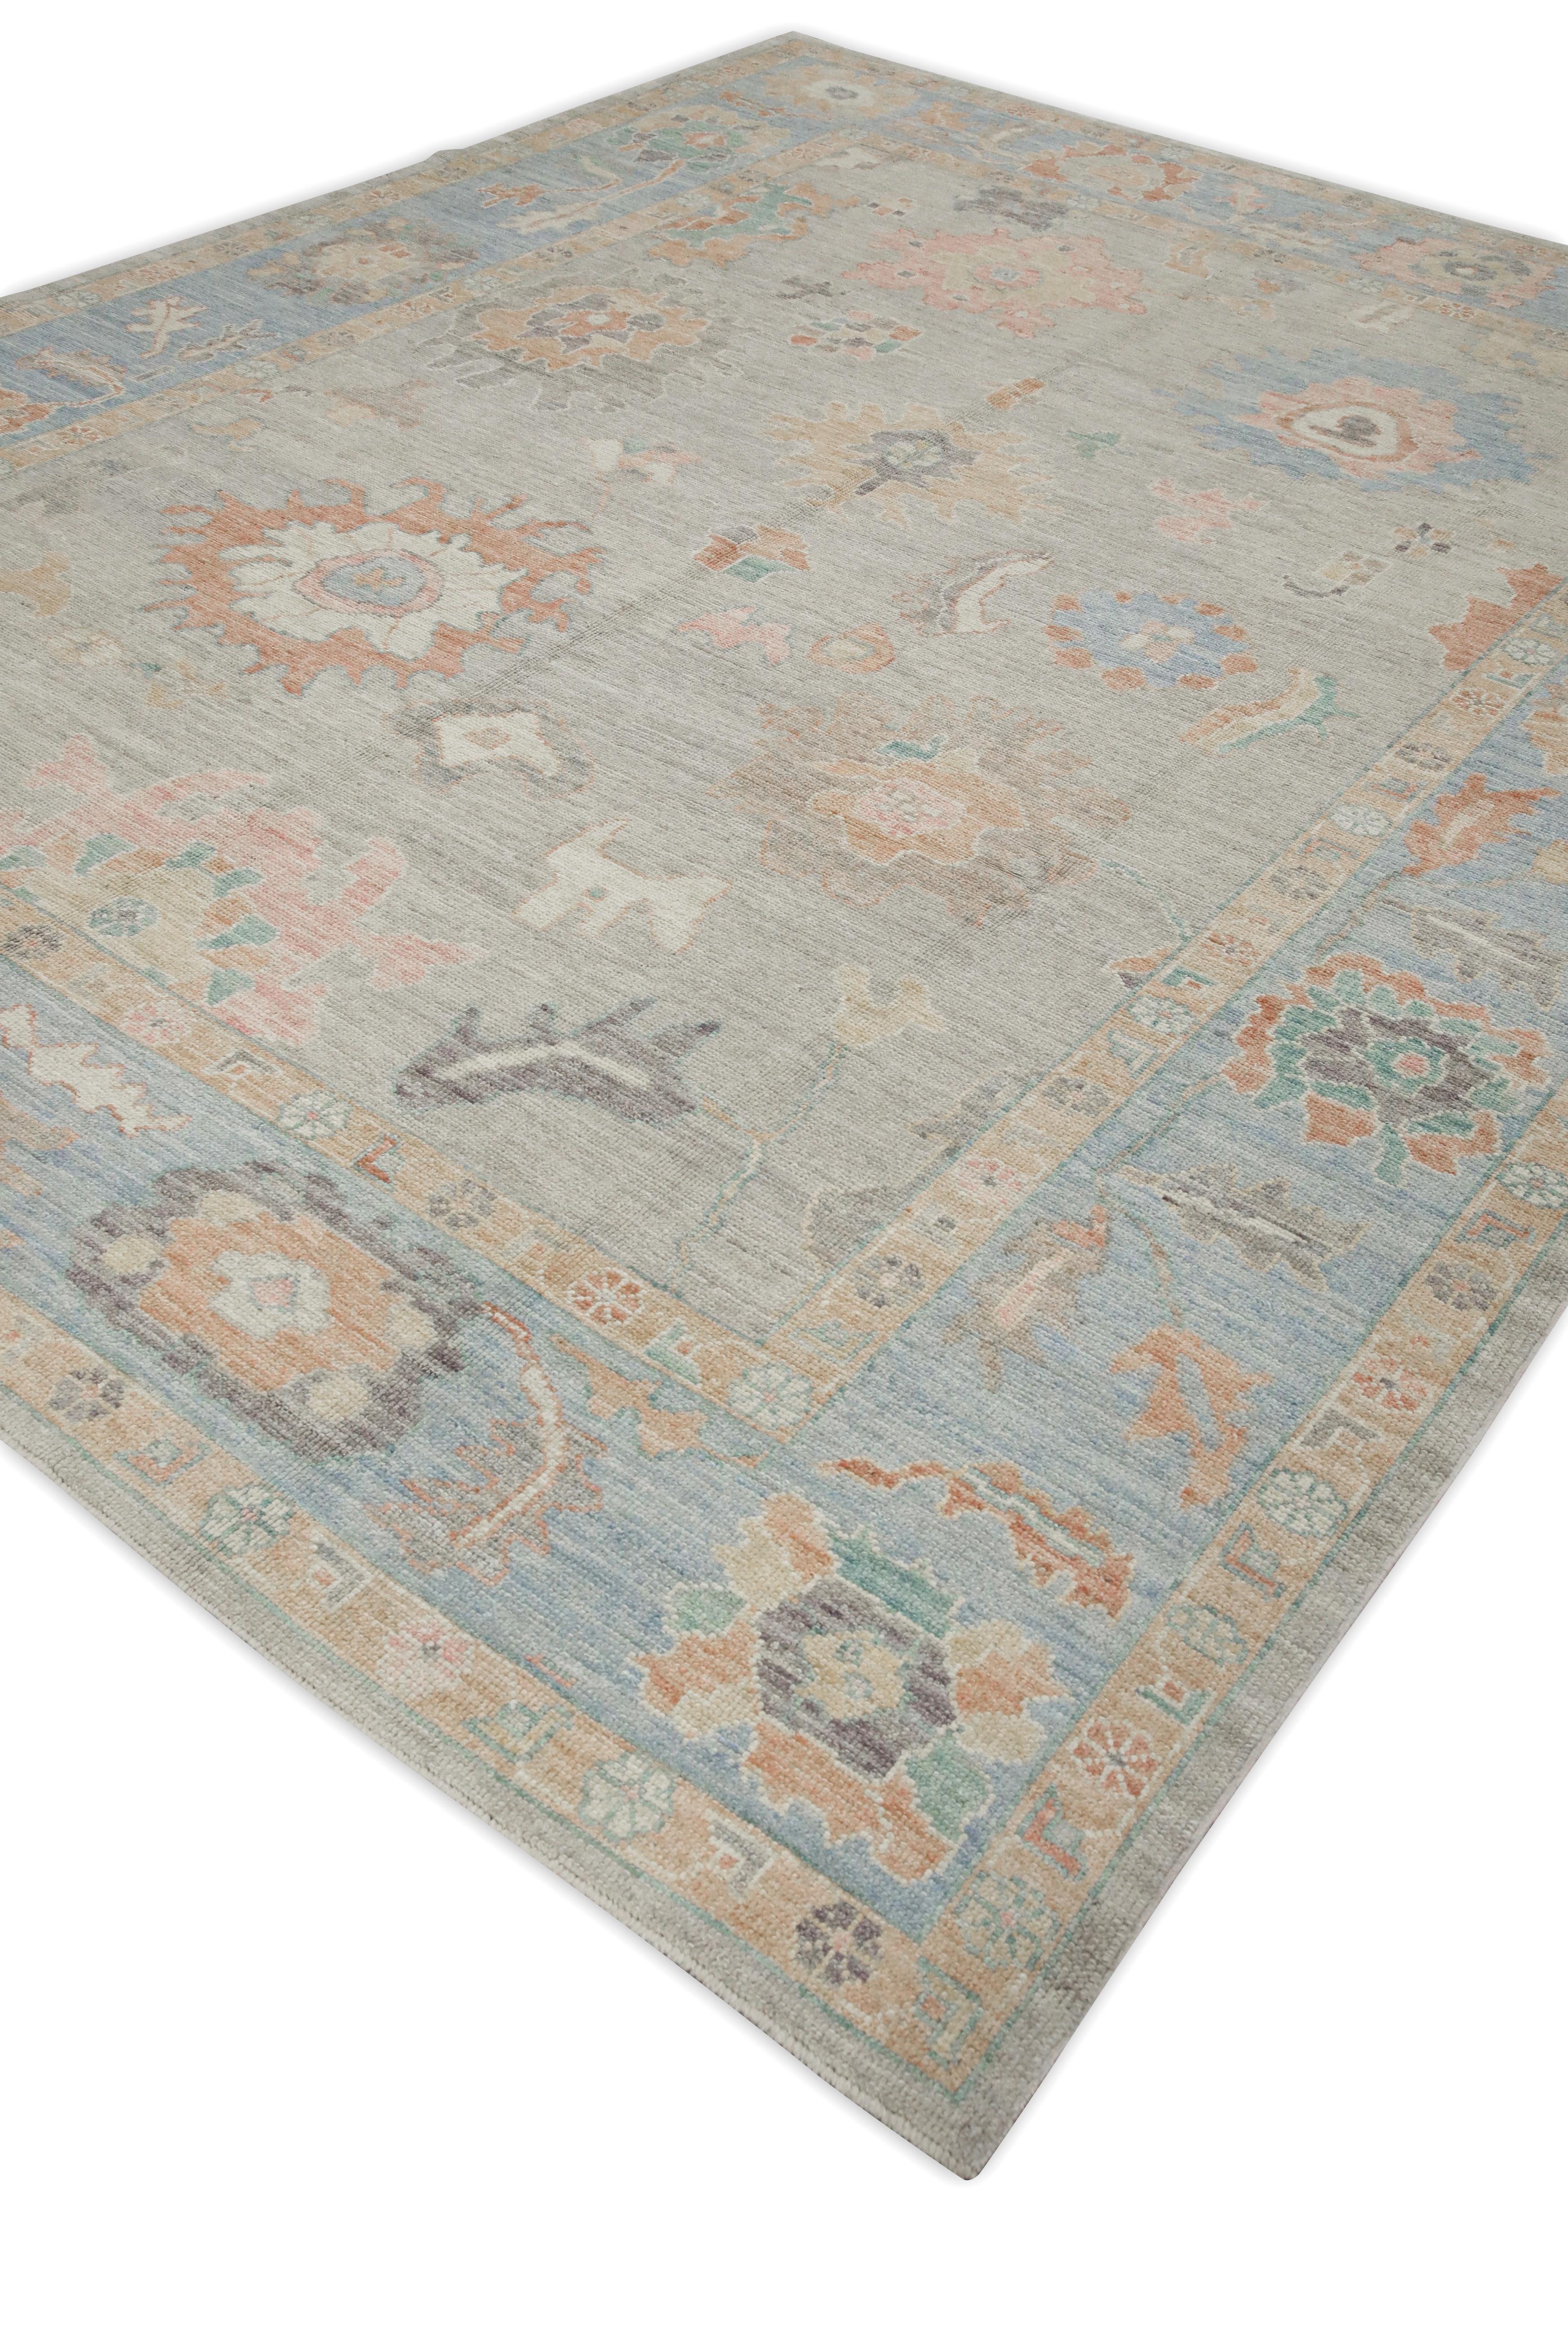 Contemporary Pink & Blue Floral Design Handwoven Wool Turkish Oushak Rug 9'6